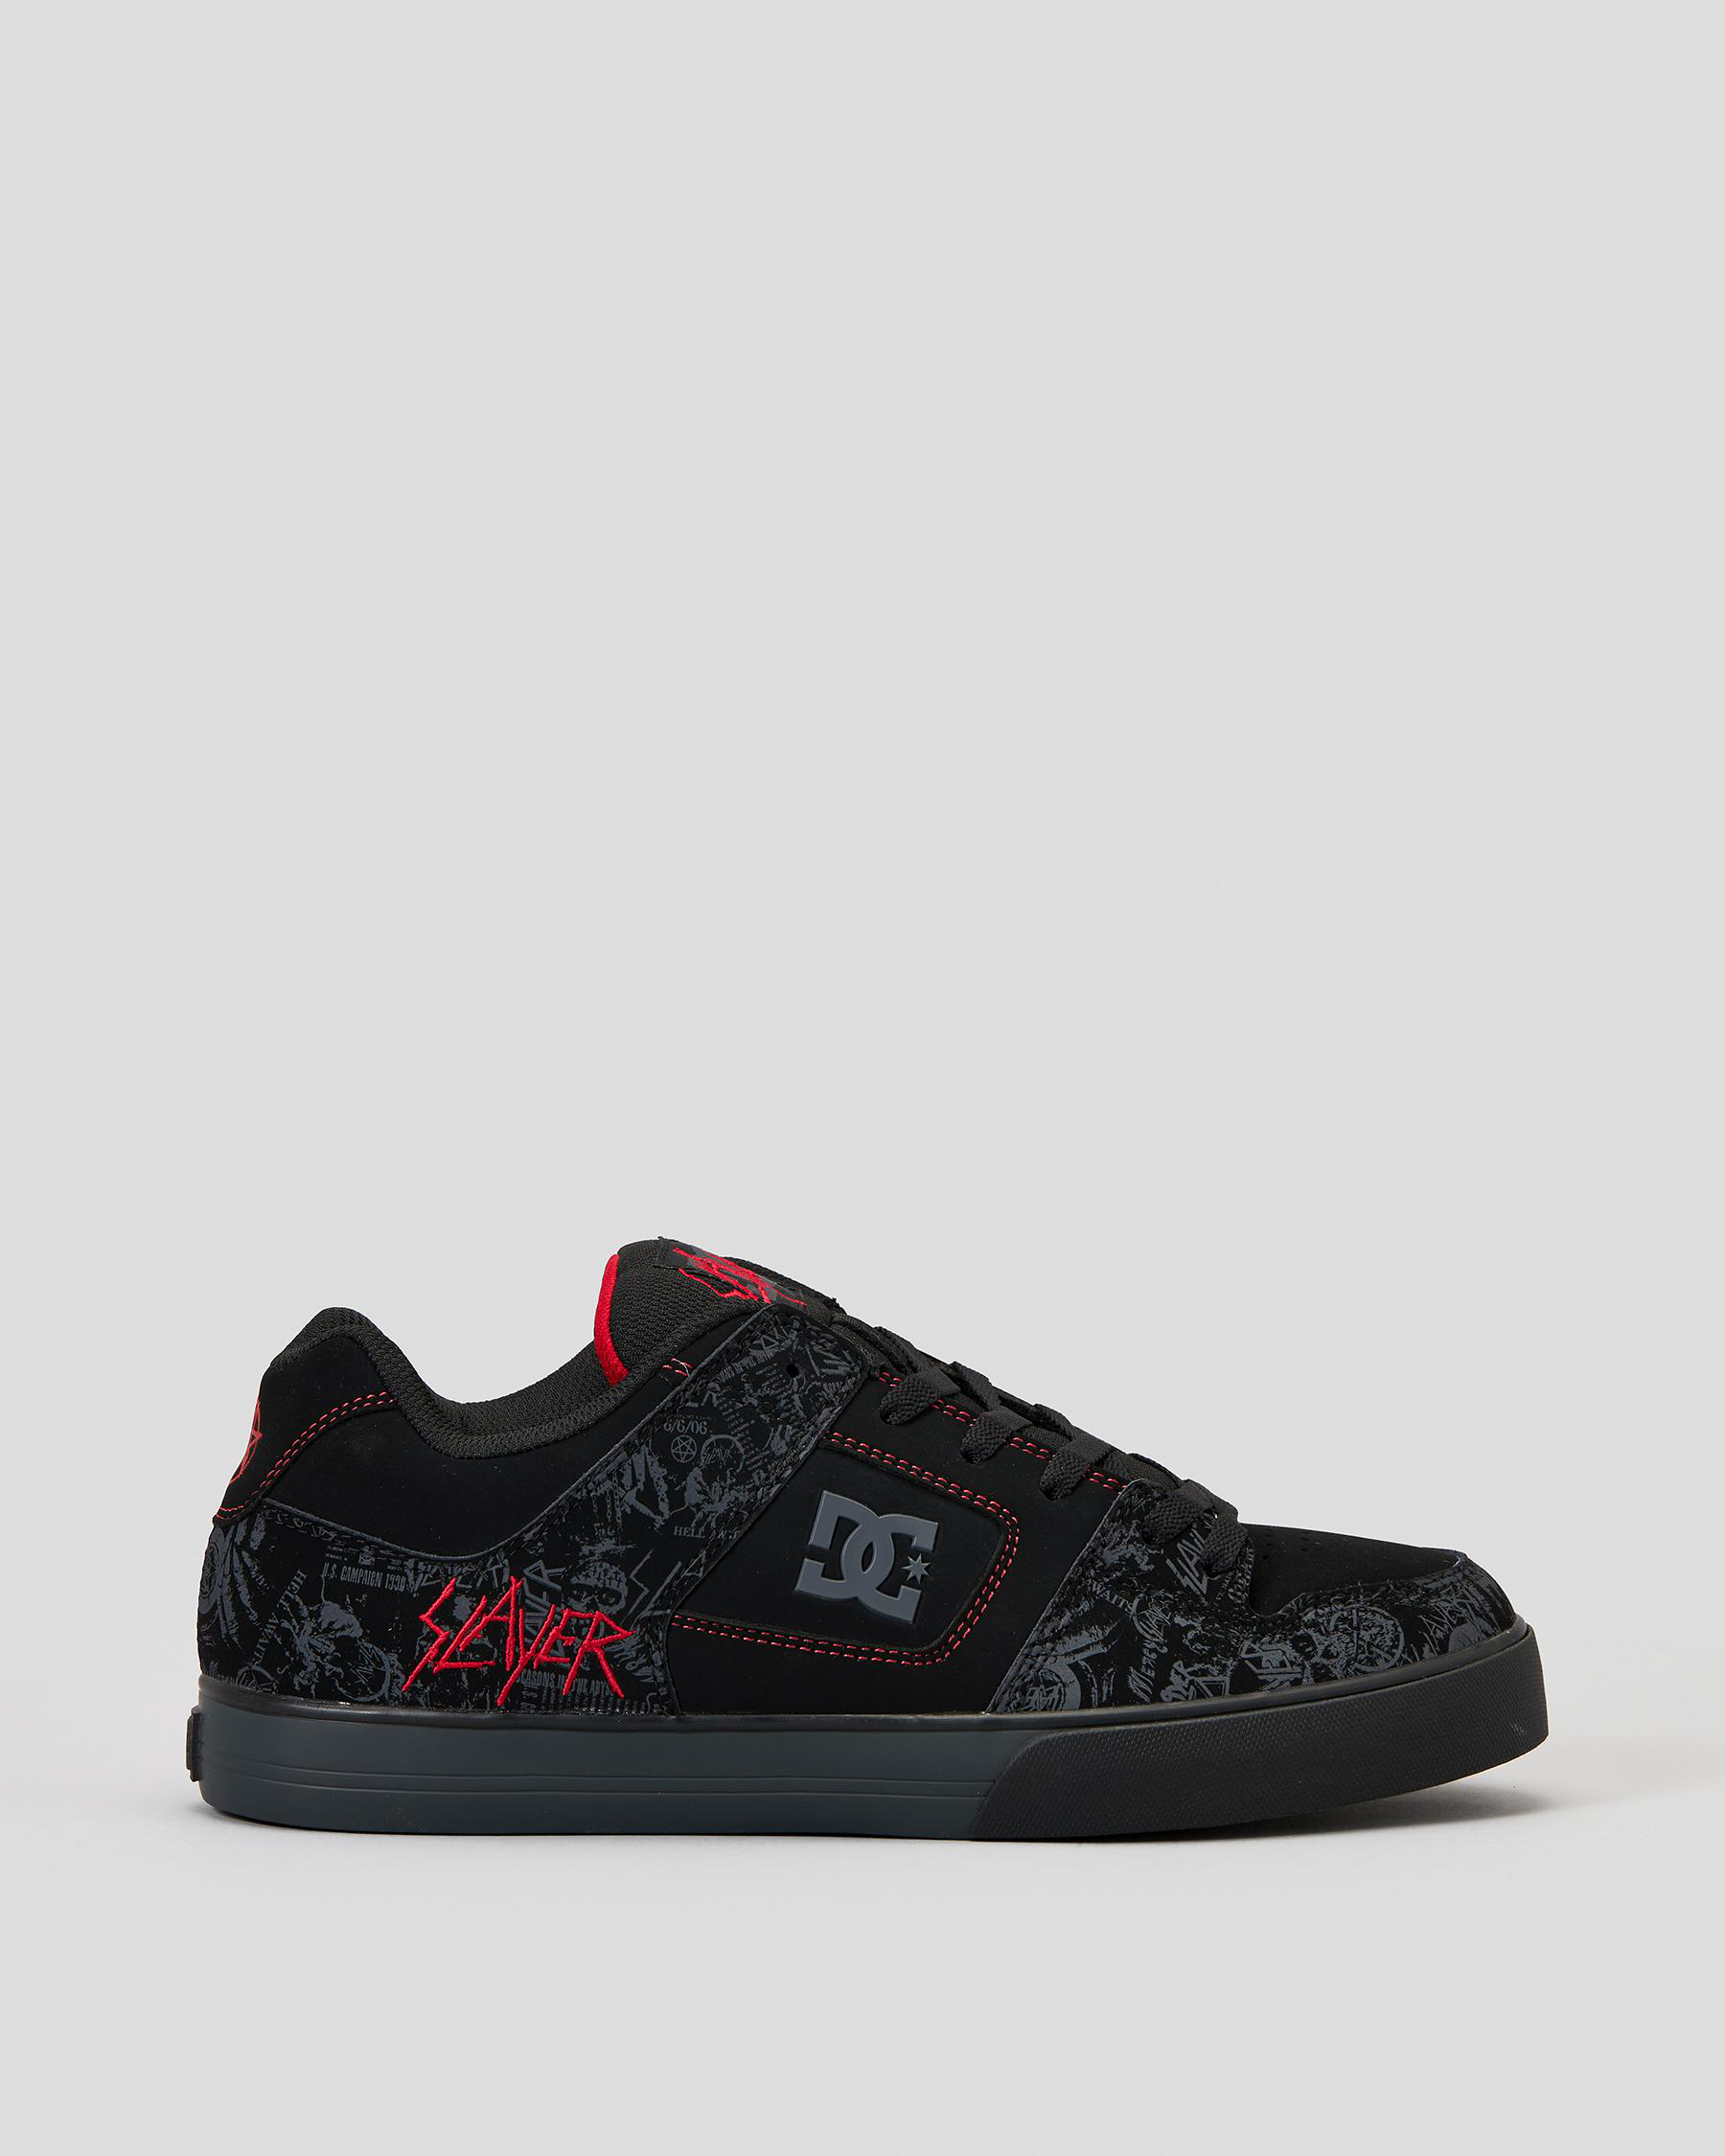 DC Shoes Slayer Pure Shoes In Black/grey/red - Fast Shipping & Easy ...